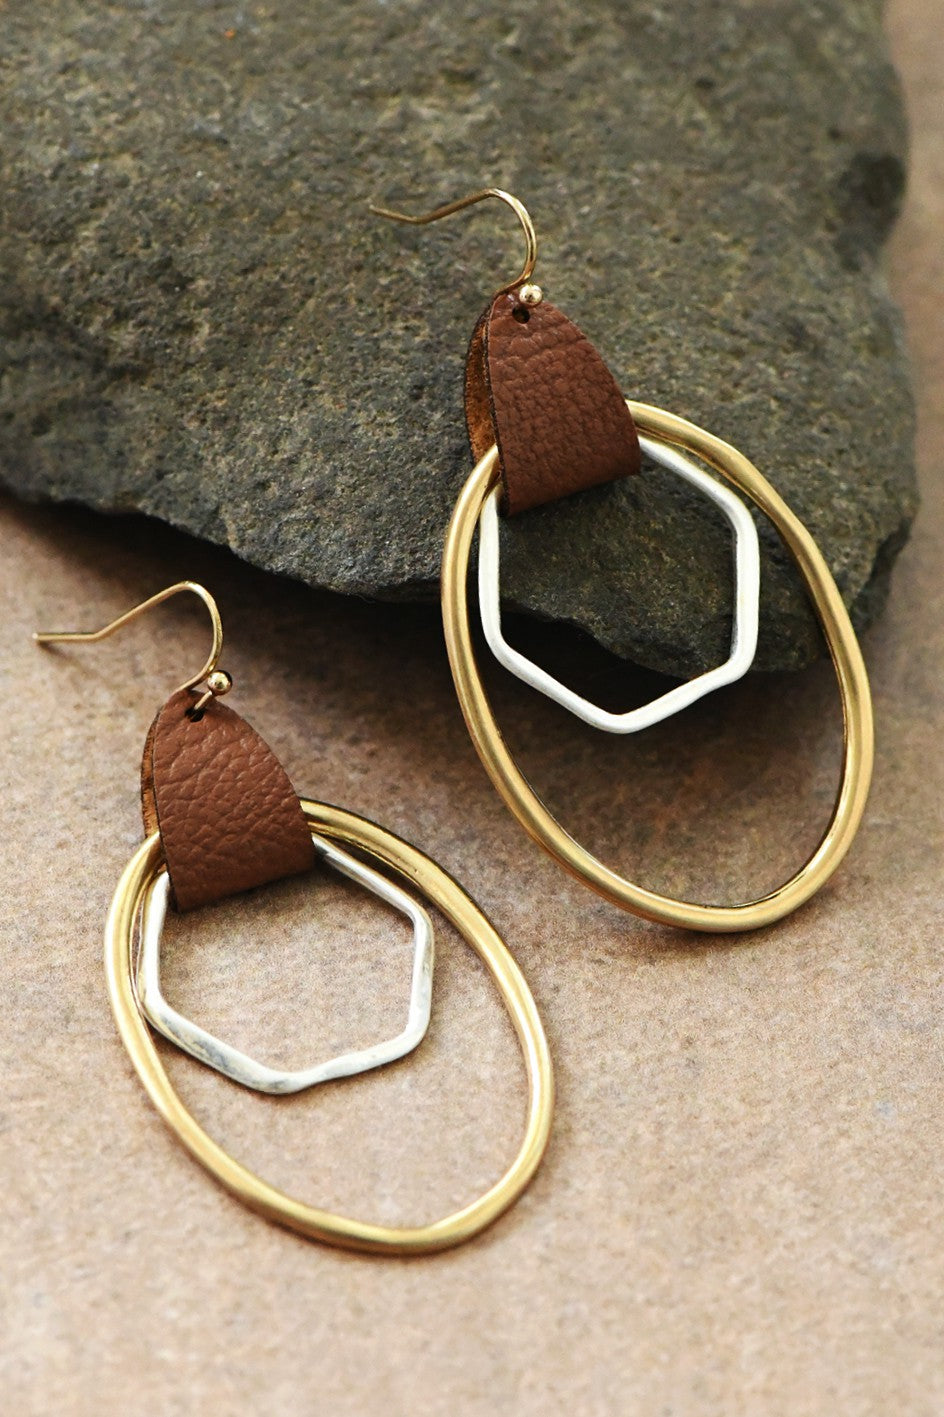 The Oval Drop Earrings with Leather Accent